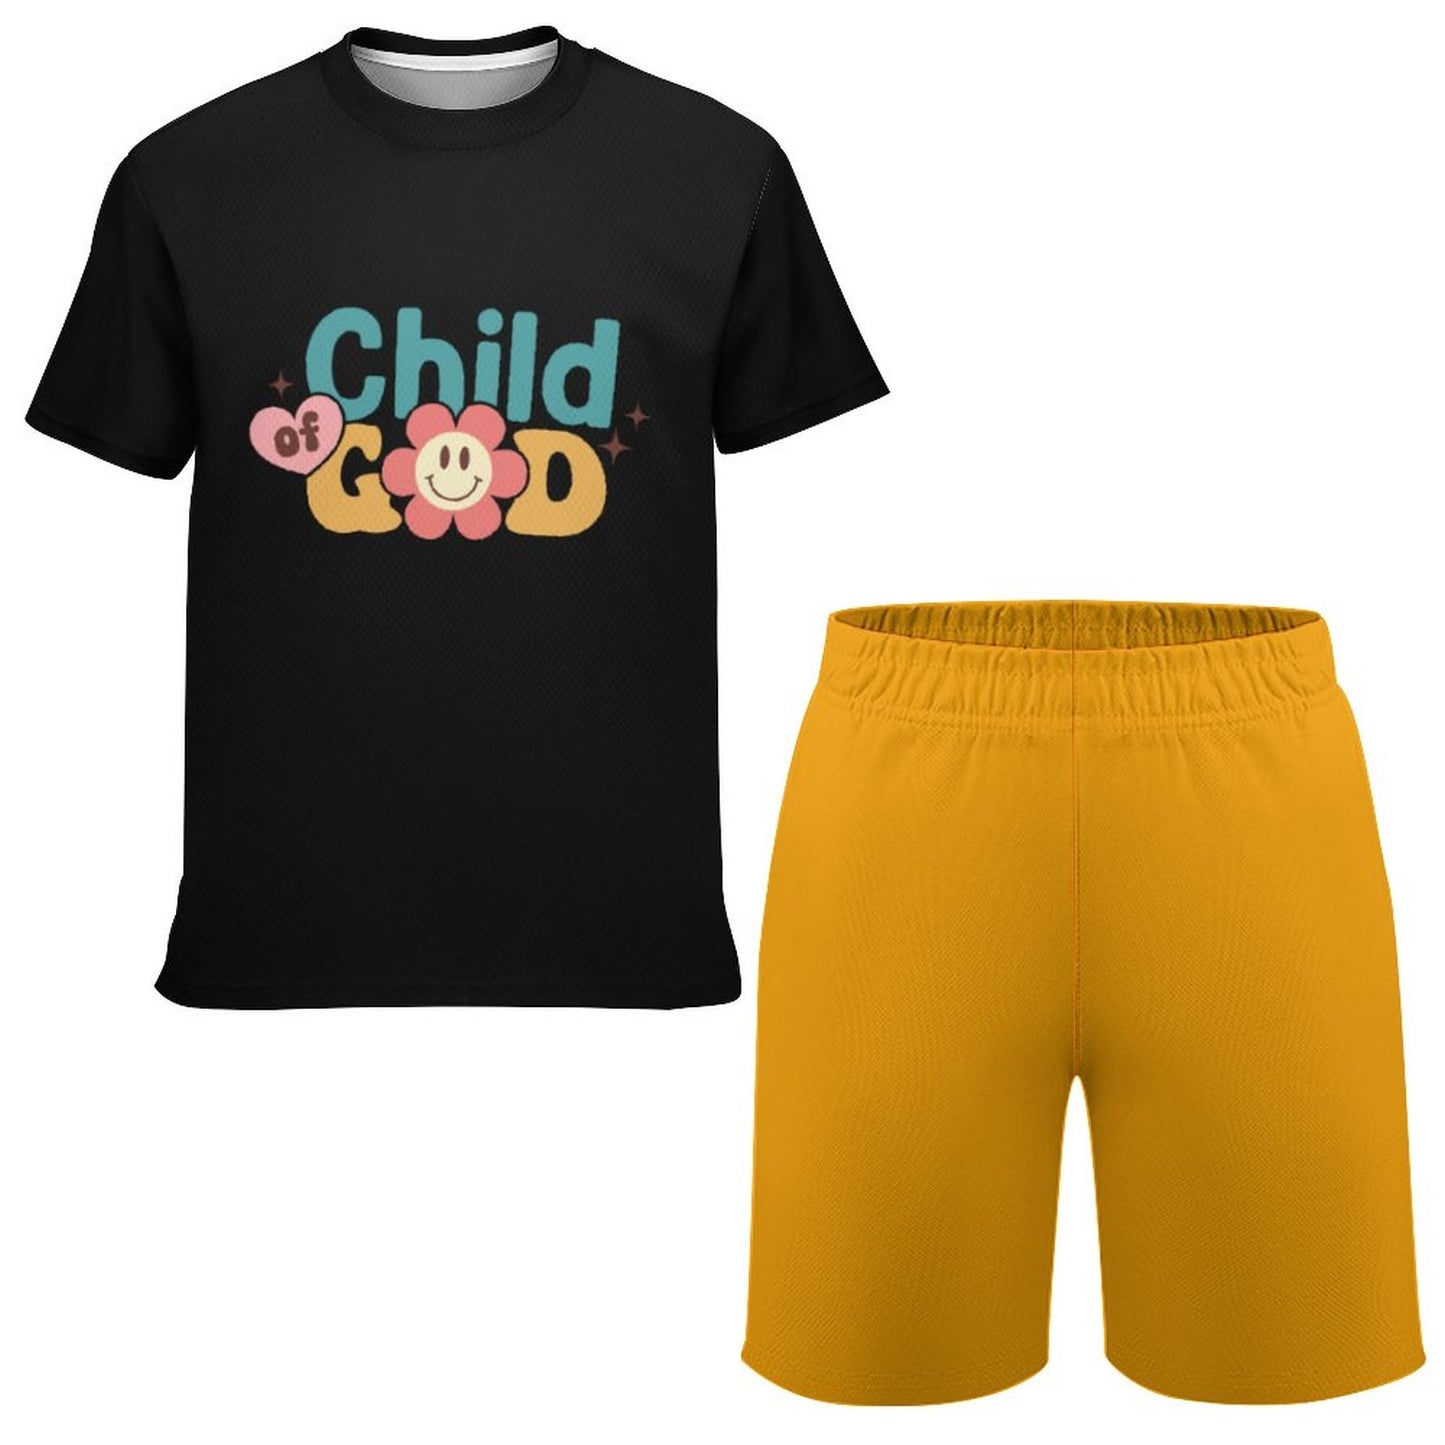 Child Of God Youth Christian Casual Shorts Set SALE-Personal Design